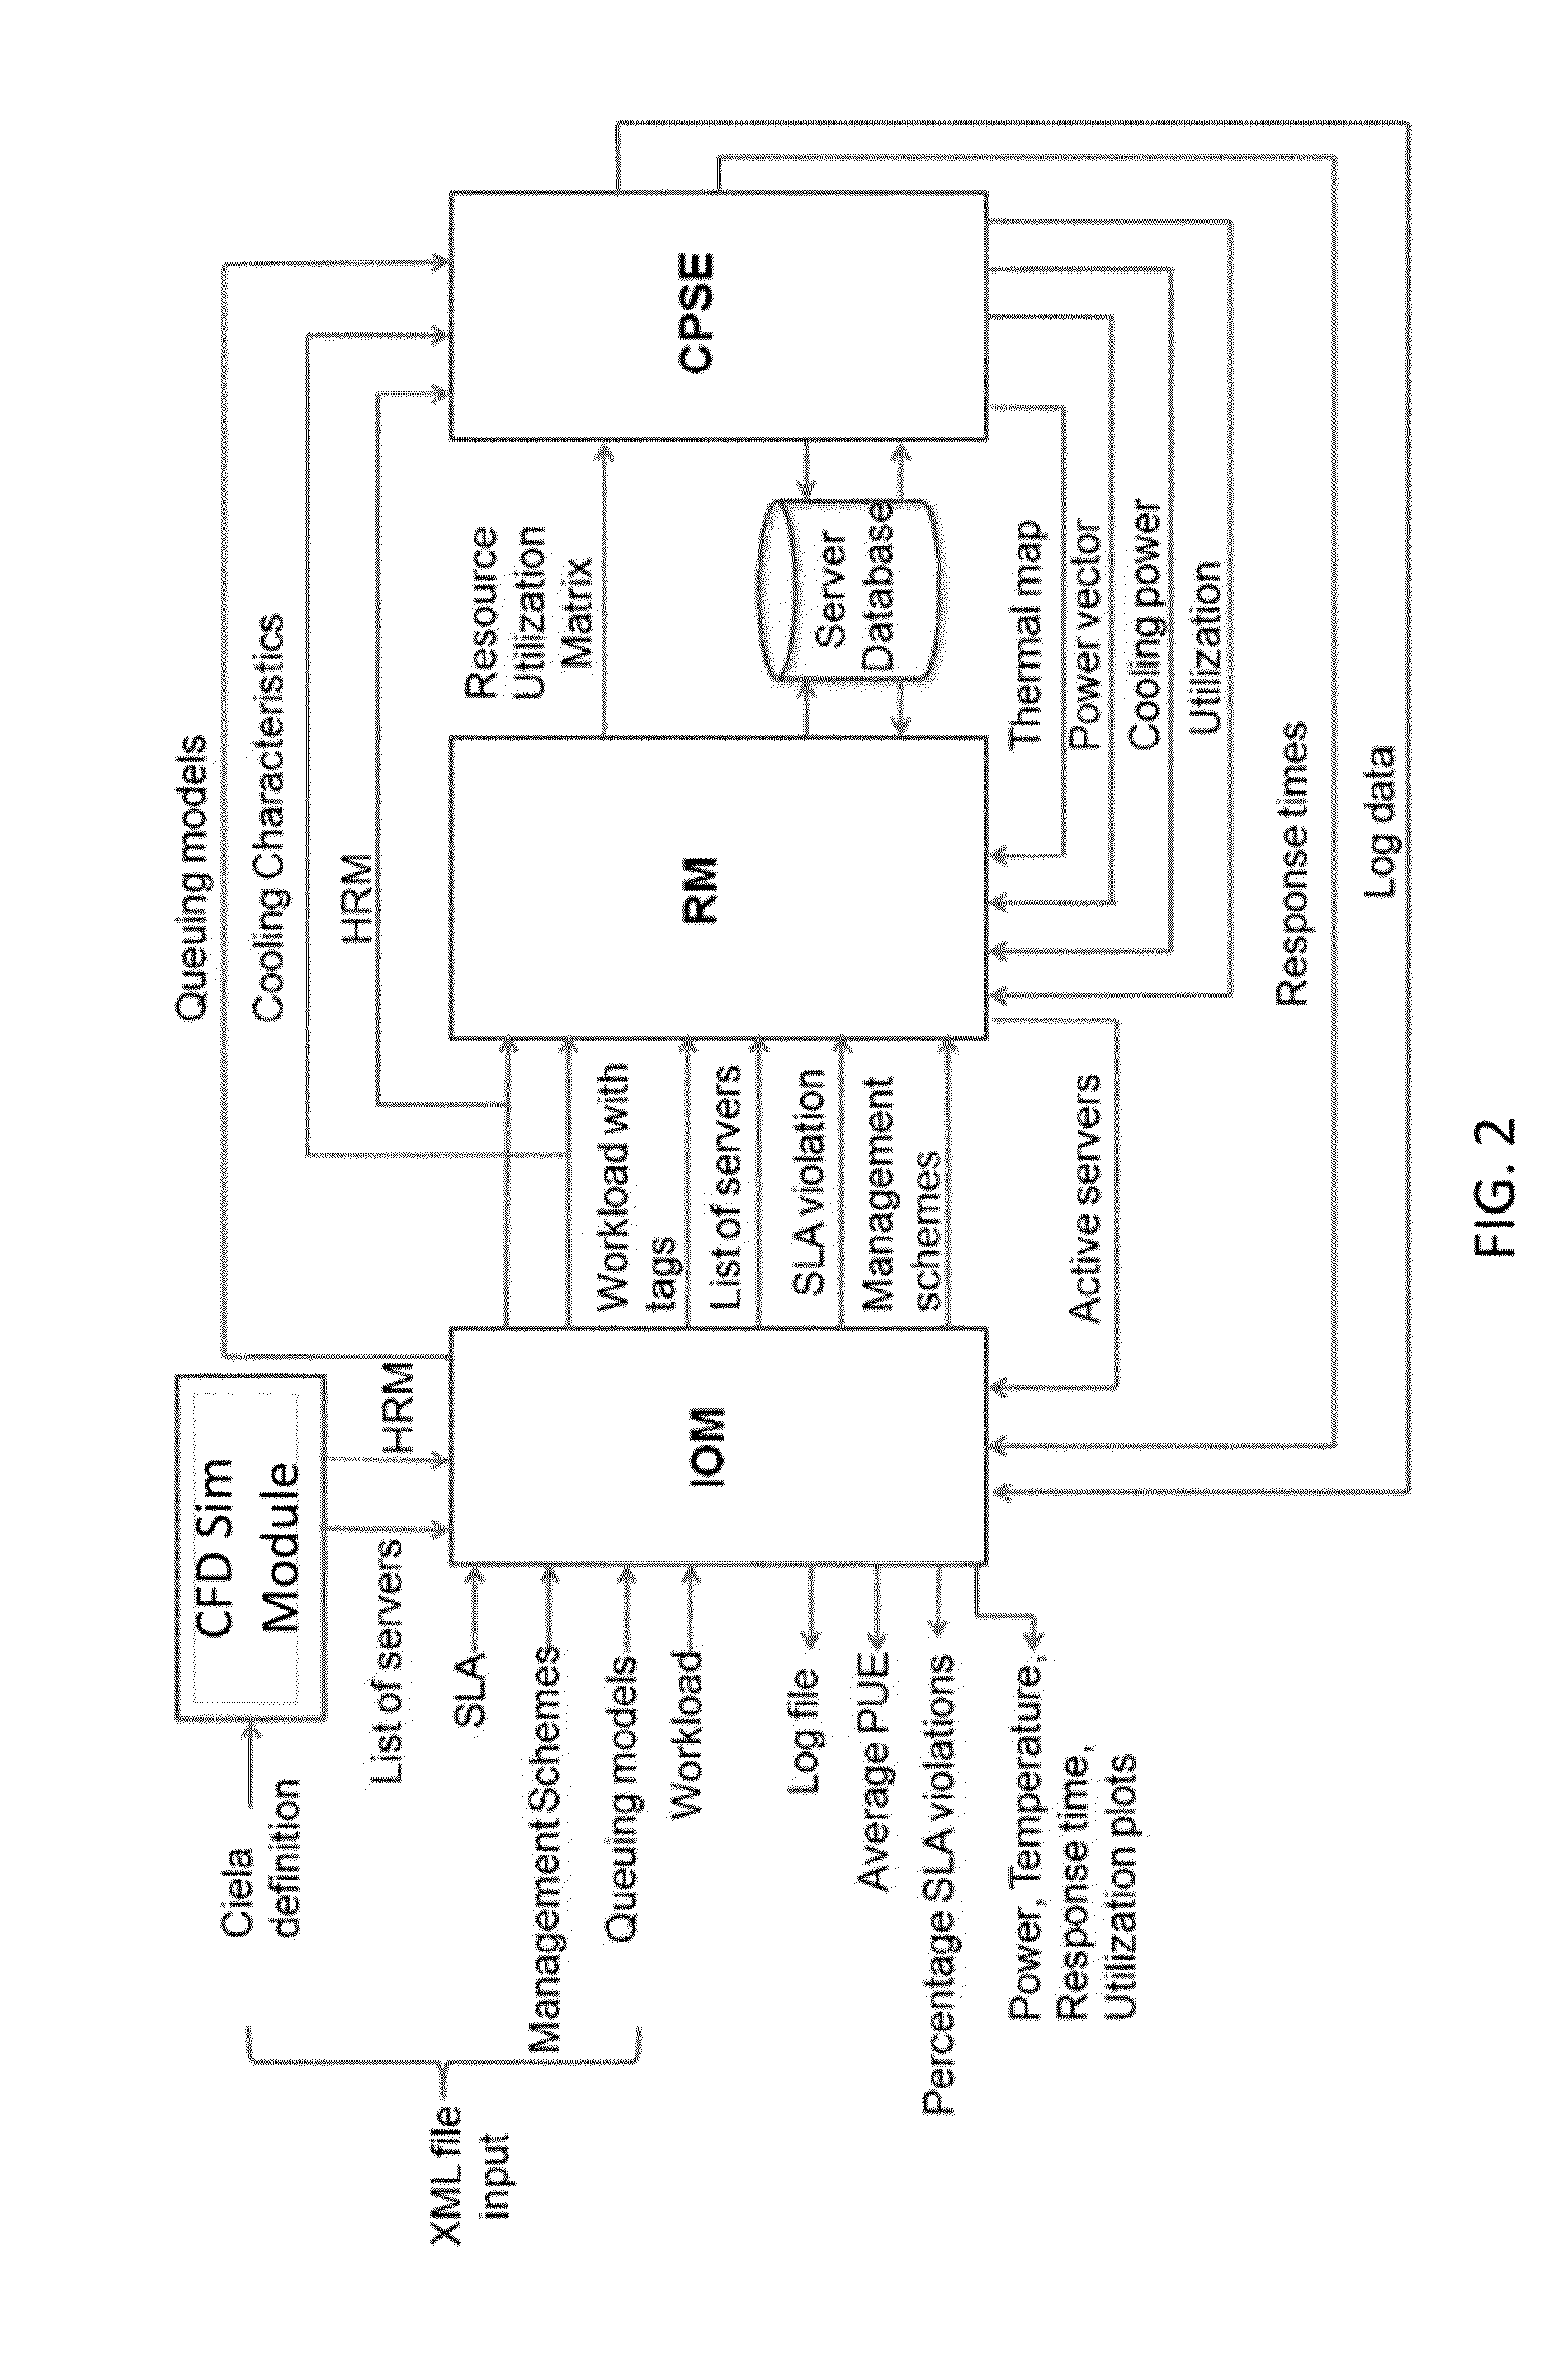 Systems, methods, and media for modeling transient thermal behavior